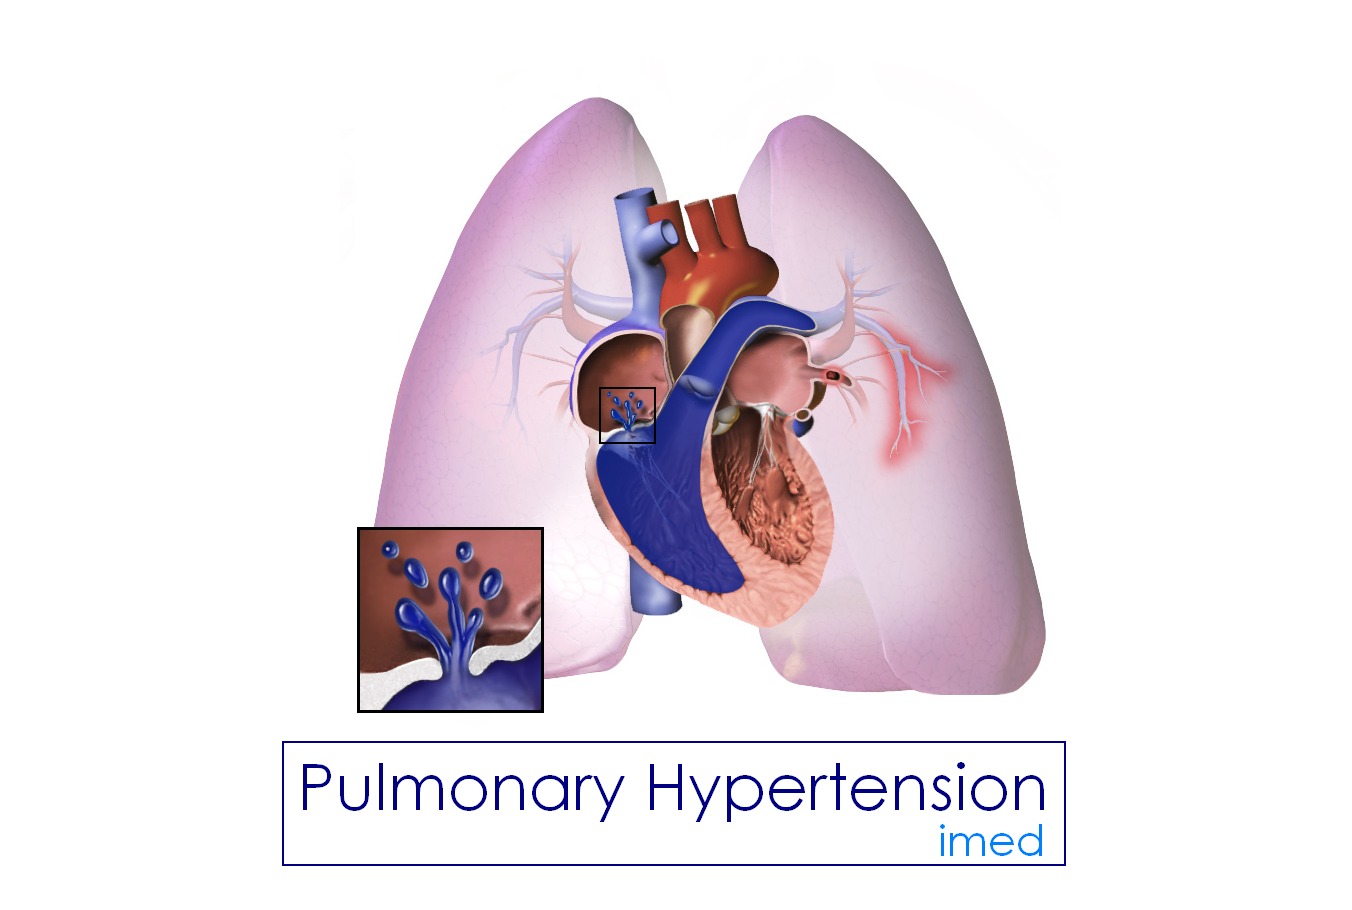 Pulmonary Hypertension: Causes, Symptoms and Treatment